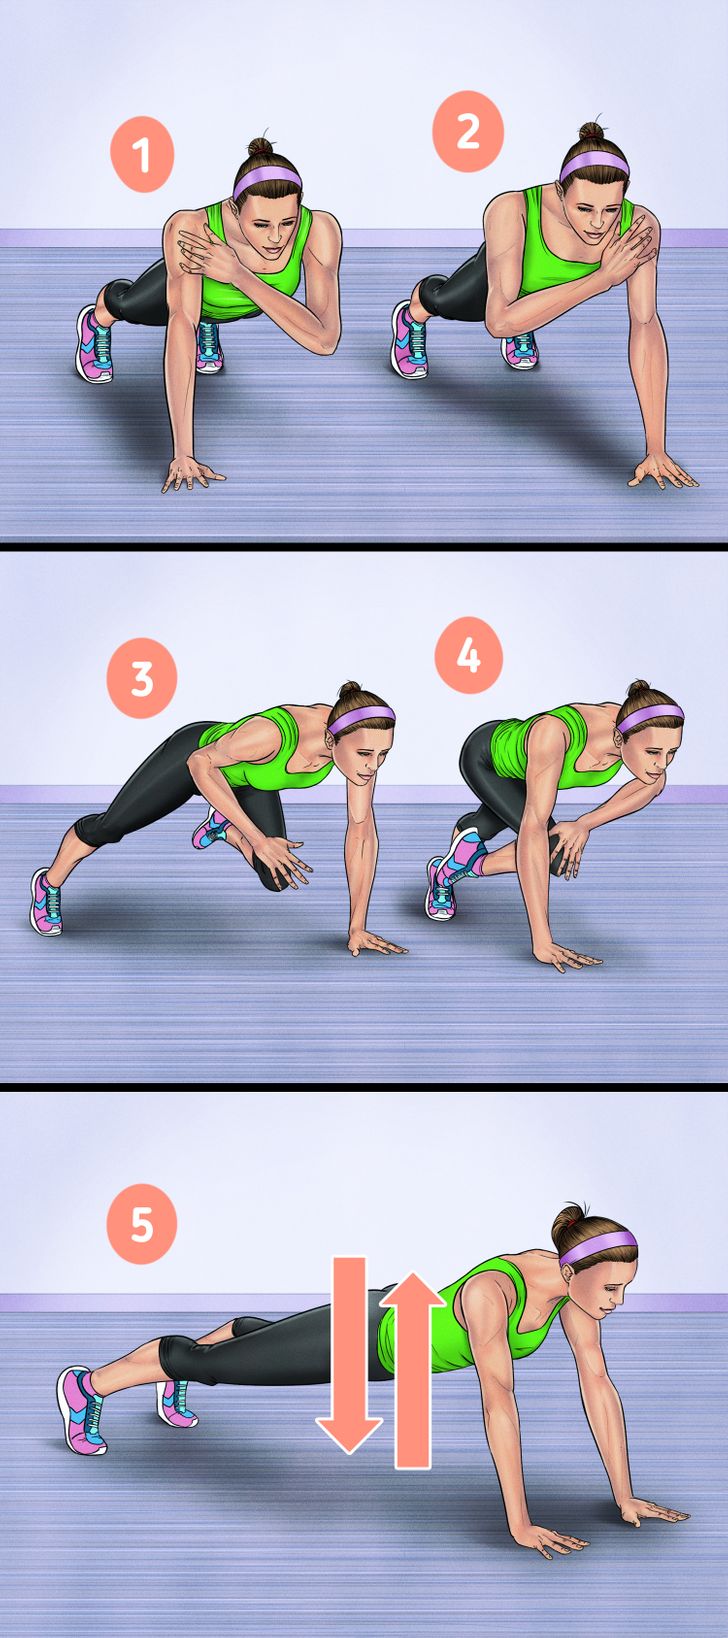 5 Simple Exercises That Will Take Only 15 Minutes of Your Time to Stay in Shape